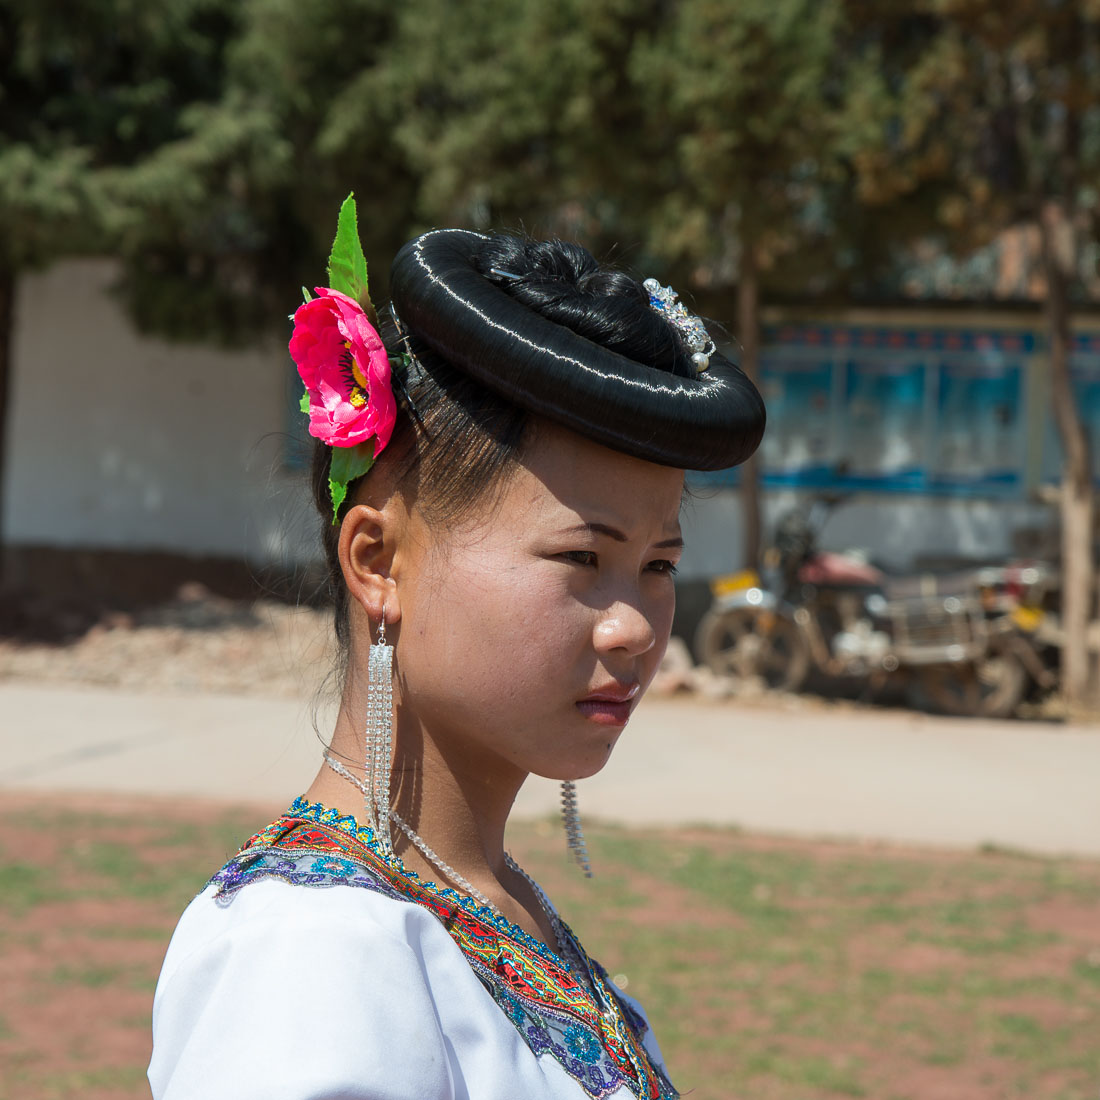 A traditional hair arrangement from the women of the Flower Miao ethnic minority people. Mao Jie village, Wuding County, Yunnan Province, China, Asia. Nikon D4, 24-120mm, f/4.0, VR